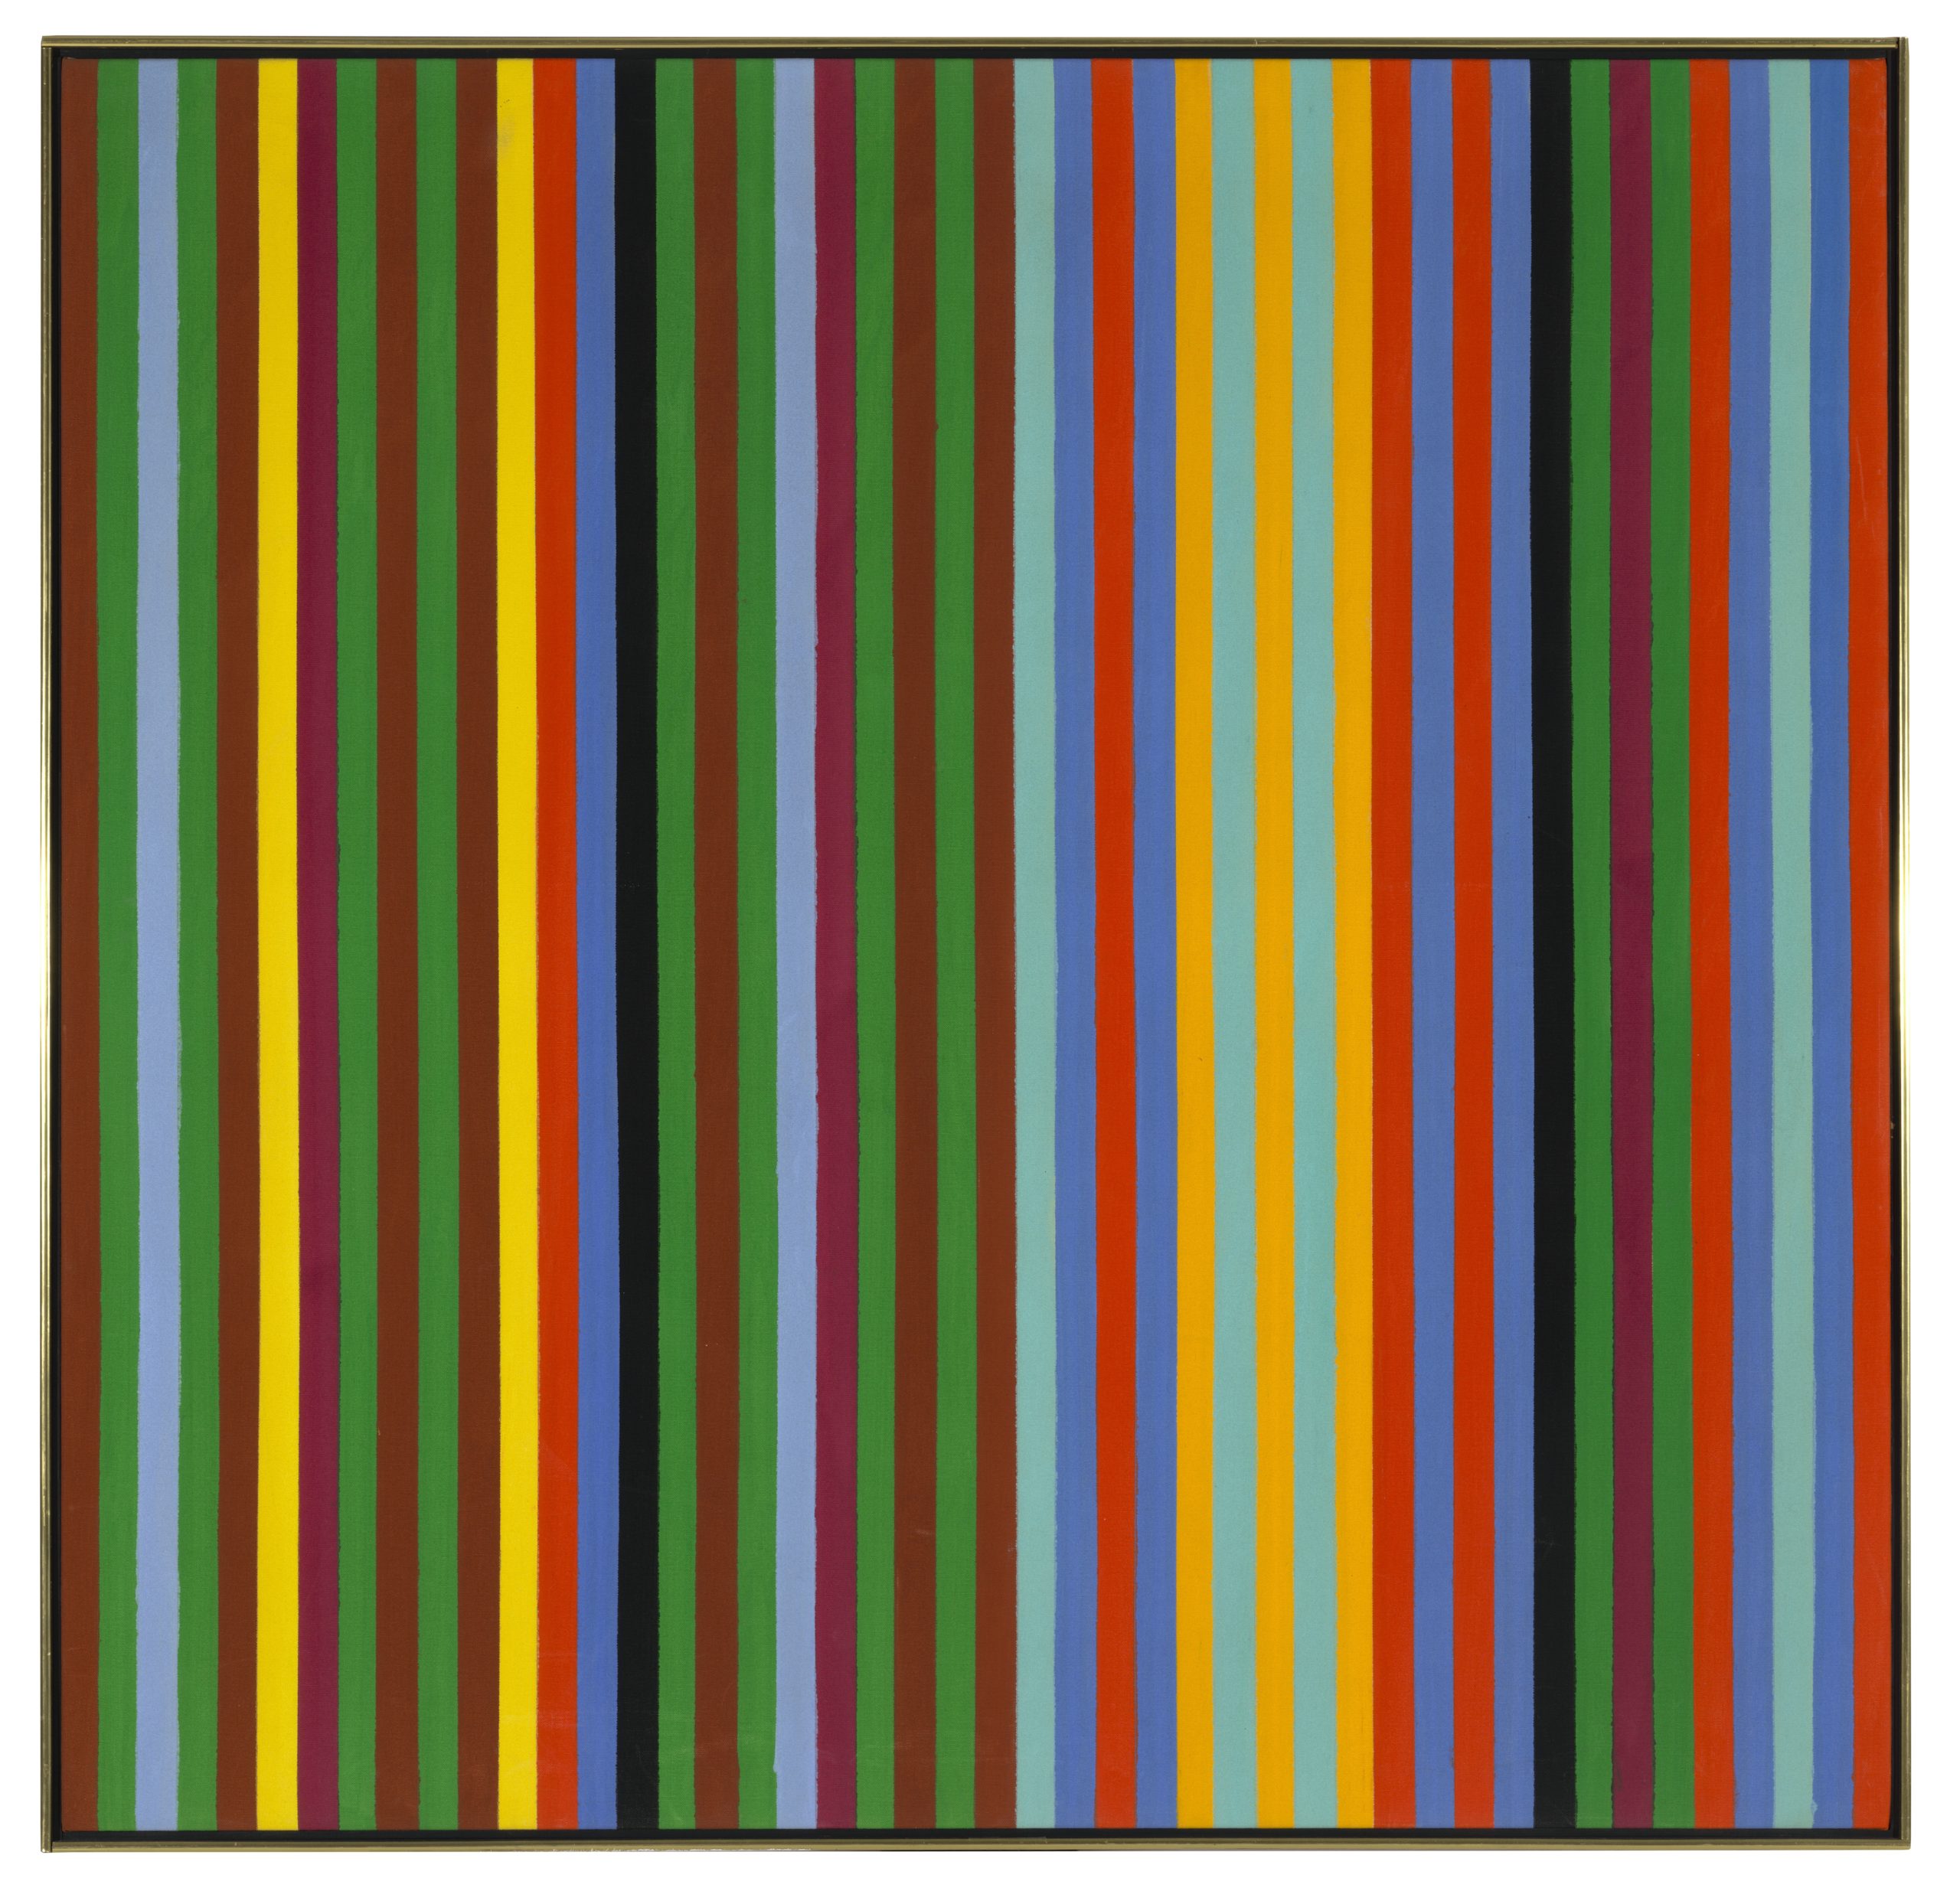 An abstract painting of solid color stripes in random order.